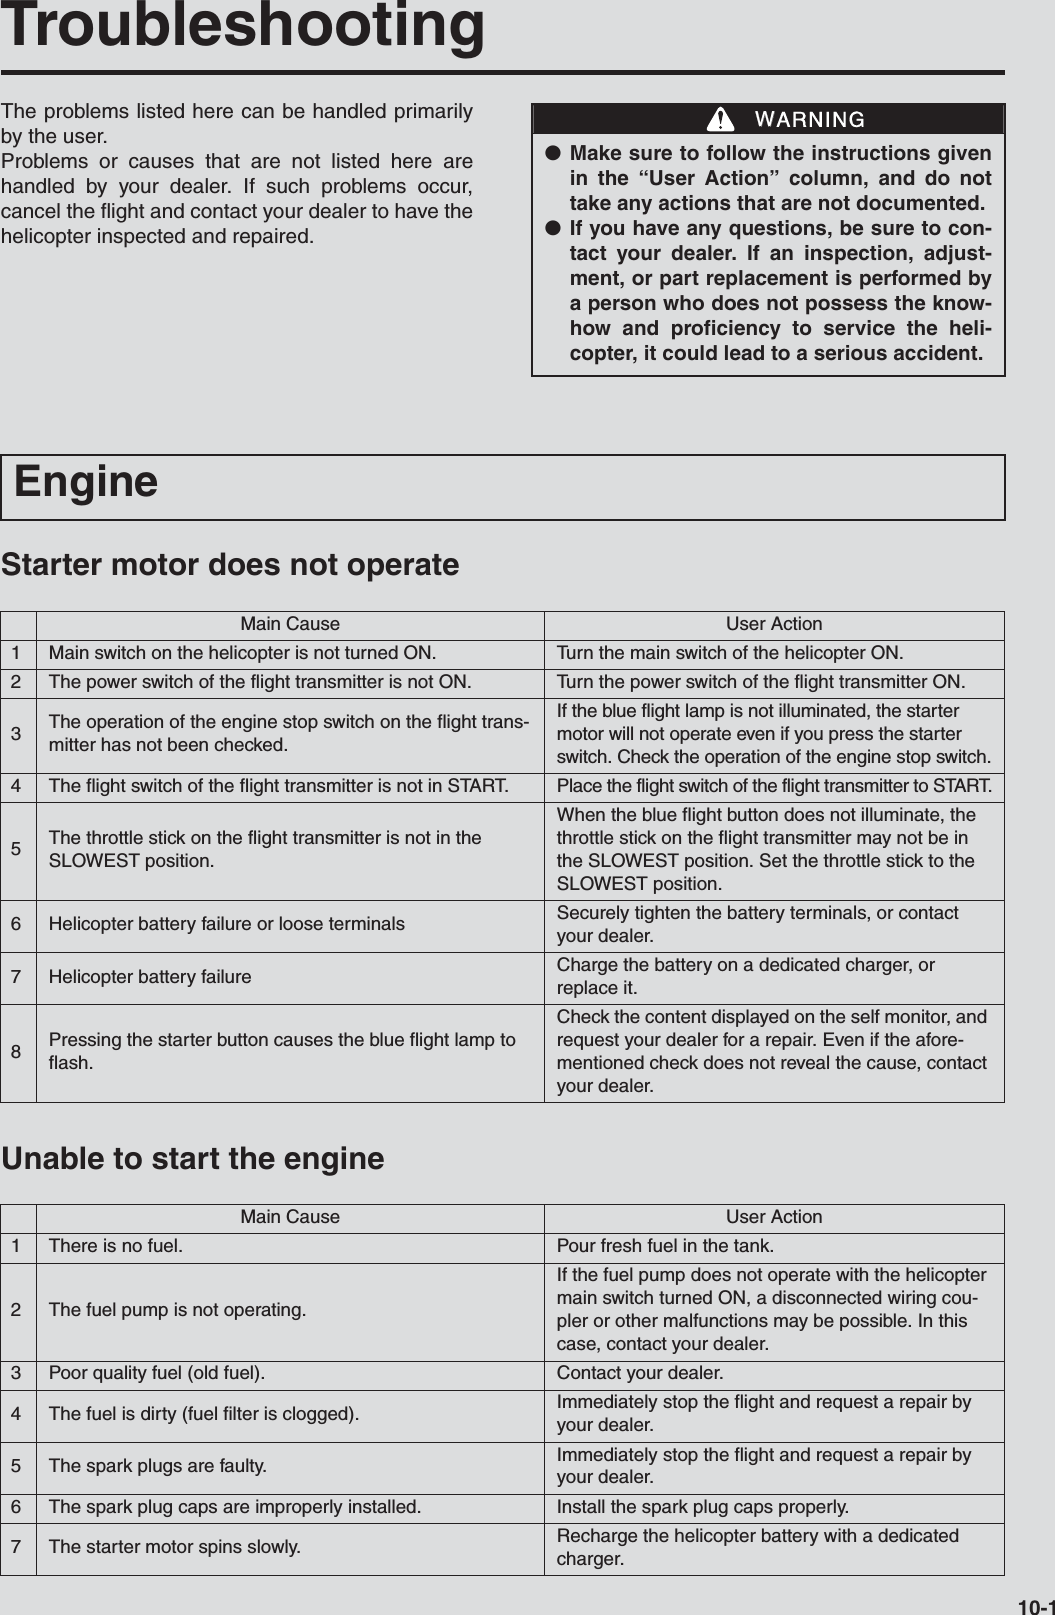 10-1TroubleshootingThe problems listed here can be handled primarilyby the user.Problems or causes that are not listed here arehandled by your dealer. If such problems occur,cancel the flight and contact your dealer to have thehelicopter inspected and repaired.Starter motor does not operateUnable to start the engine●Make sure to follow the instructions givenin the “User Action” column, and do nottake any actions that are not documented. ●If you have any questions, be sure to con-tact your dealer. If an inspection, adjust-ment, or part replacement is performed bya person who does not possess the know-how and proficiency to service the heli-copter, it could lead to a serious accident.WWARNINGEngineMain Cause User Action1 Main switch on the helicopter is not turned ON. Turn the main switch of the helicopter ON.2 The power switch of the flight transmitter is not ON. Turn the power switch of the flight transmitter ON.3The operation of the engine stop switch on the flight trans-mitter has not been checked.If the blue flight lamp is not illuminated, the starter motor will not operate even if you press the starter switch. Check the operation of the engine stop switch.4 The flight switch of the flight transmitter is not in START. Place the flight switch of the flight transmitter to START.5The throttle stick on the flight transmitter is not in the SLOWEST position.When the blue flight button does not illuminate, the throttle stick on the flight transmitter may not be in the SLOWEST position. Set the throttle stick to the SLOWEST position.6 Helicopter battery failure or loose terminals Securely tighten the battery terminals, or contact your dealer.7 Helicopter battery failure Charge the battery on a dedicated charger, or replace it.8Pressing the starter button causes the blue flight lamp to flash.Check the content displayed on the self monitor, and request your dealer for a repair. Even if the afore-mentioned check does not reveal the cause, contact your dealer.Main Cause User Action1 There is no fuel. Pour fresh fuel in the tank.2 The fuel pump is not operating.If the fuel pump does not operate with the helicopter main switch turned ON, a disconnected wiring cou-pler or other malfunctions may be possible. In this case, contact your dealer.3 Poor quality fuel (old fuel). Contact your dealer.4 The fuel is dirty (fuel filter is clogged). Immediately stop the flight and request a repair by your dealer.5 The spark plugs are faulty. Immediately stop the flight and request a repair by your dealer.6 The spark plug caps are improperly installed. Install the spark plug caps properly.7 The starter motor spins slowly. Recharge the helicopter battery with a dedicated charger.